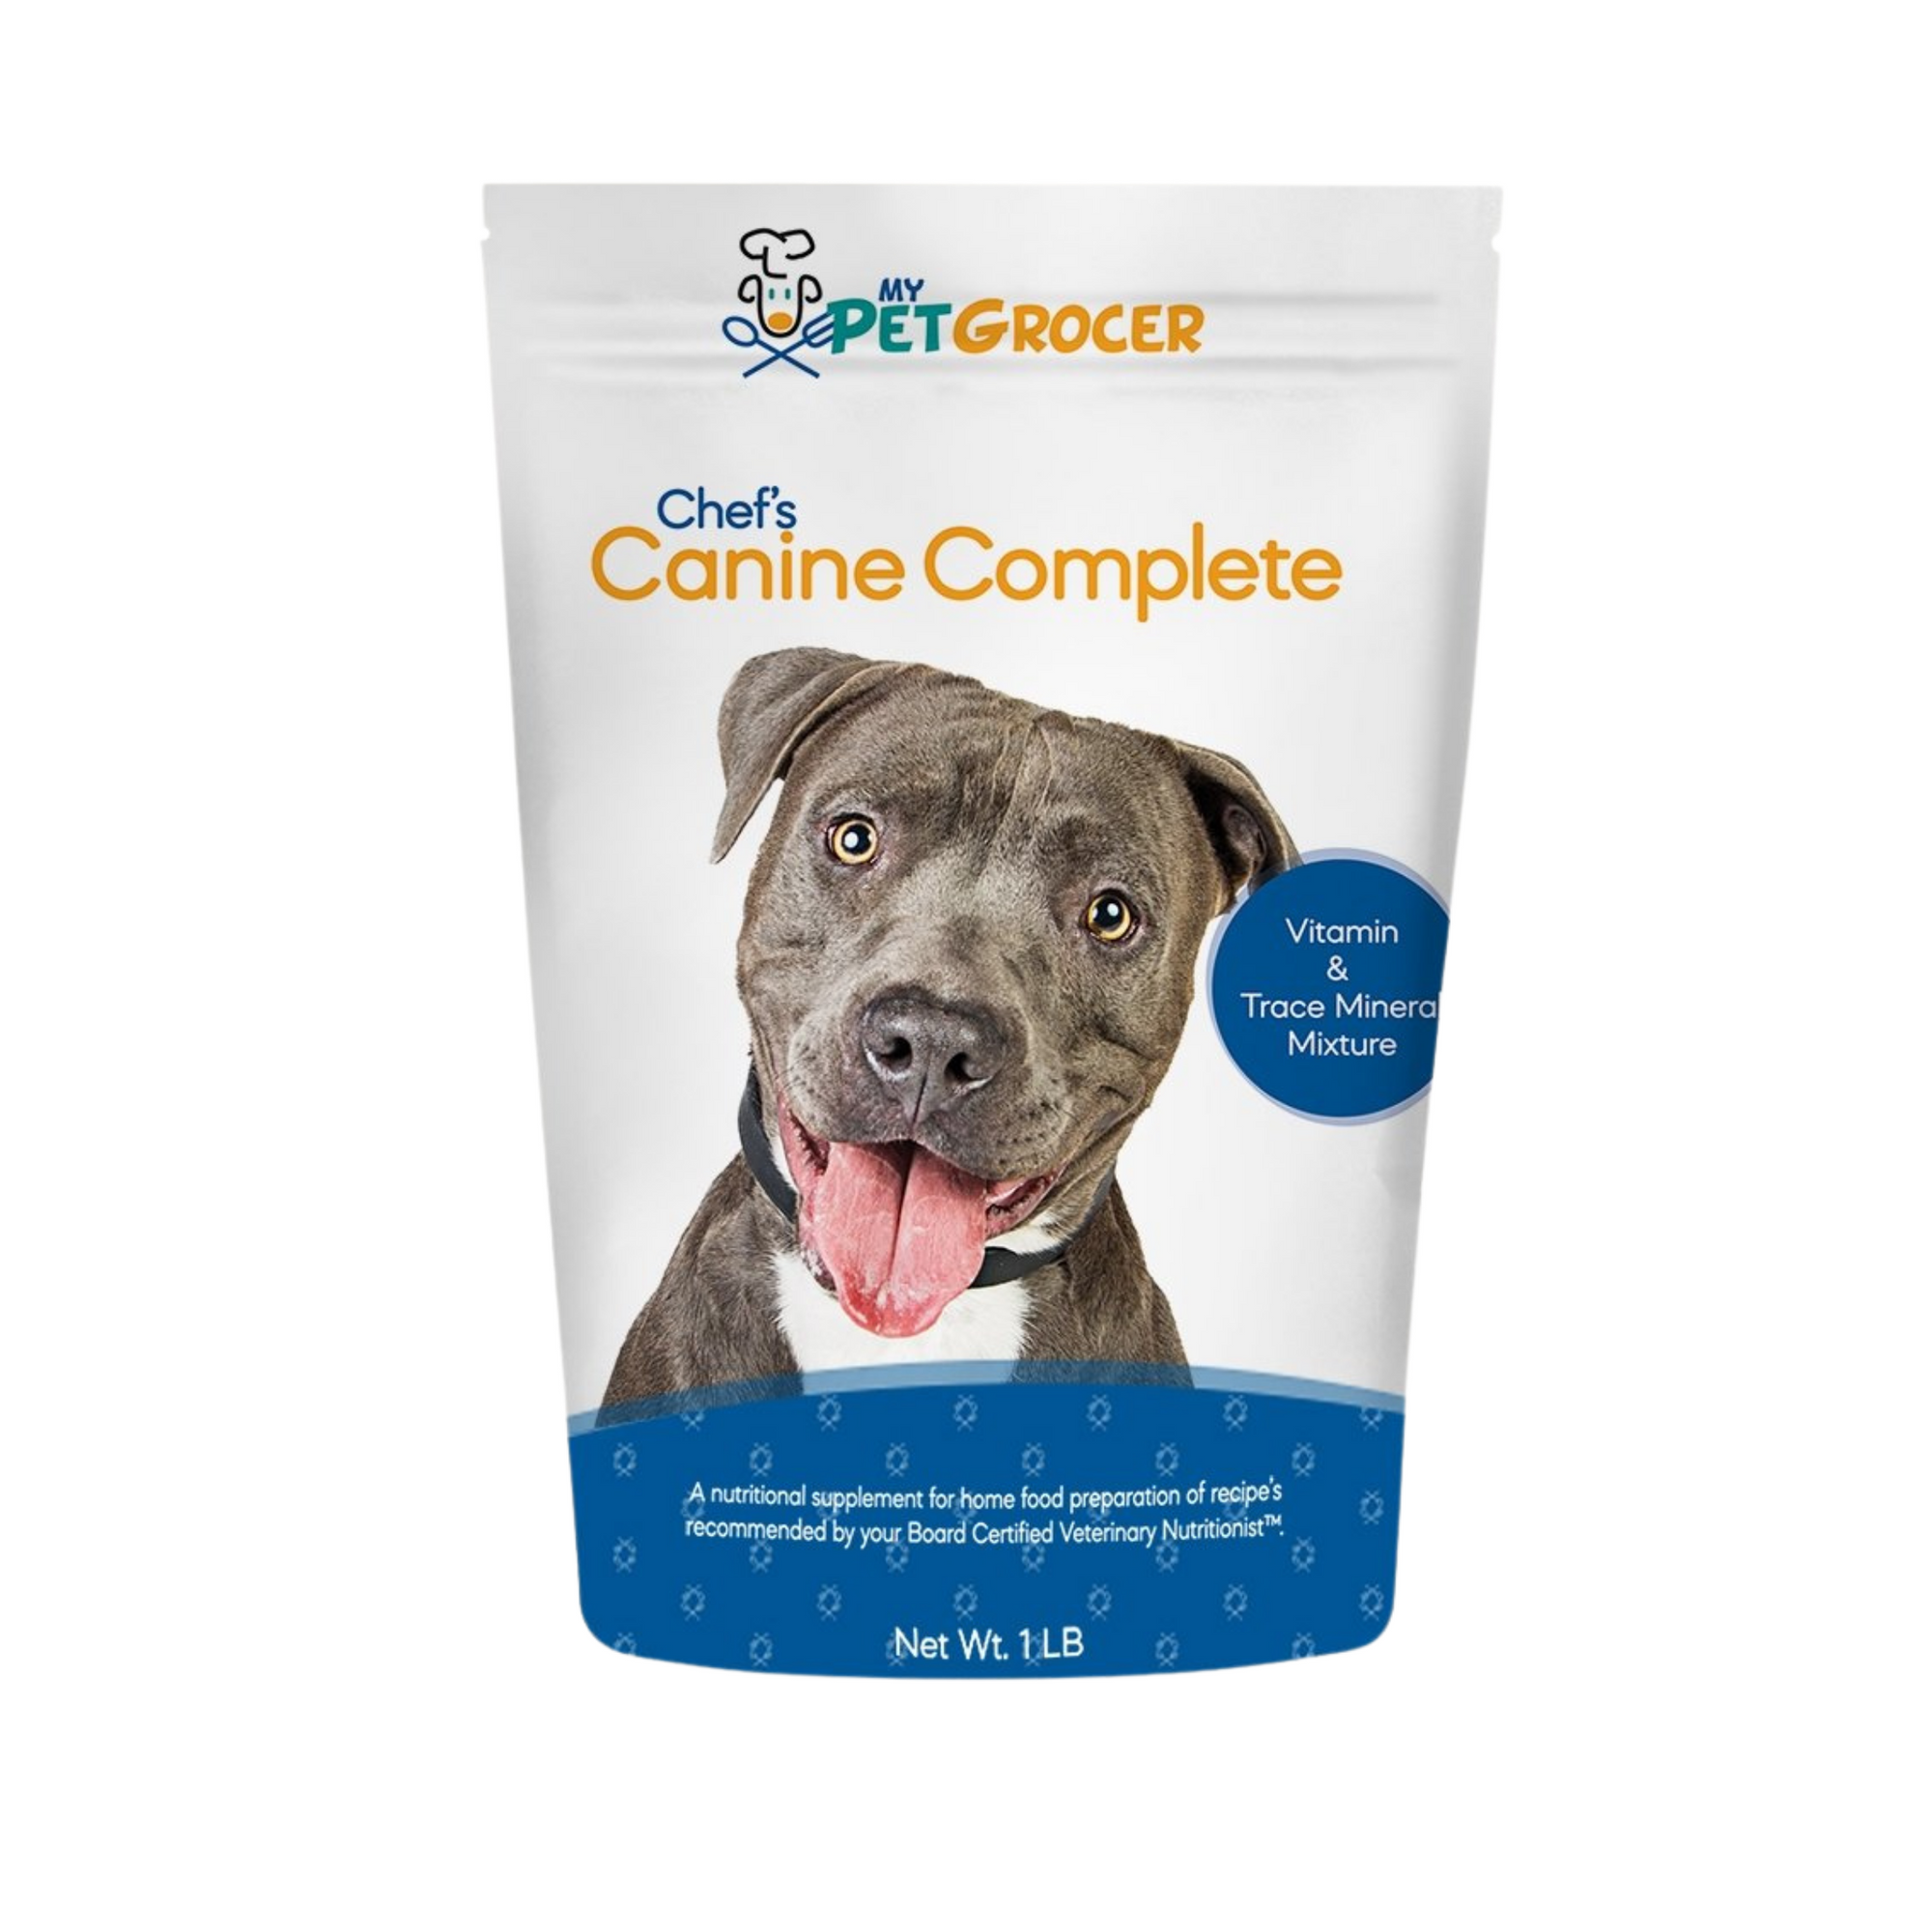 Chef's Canine Complete | Vitamin & Trace Mineral Mix | 1lb Bag